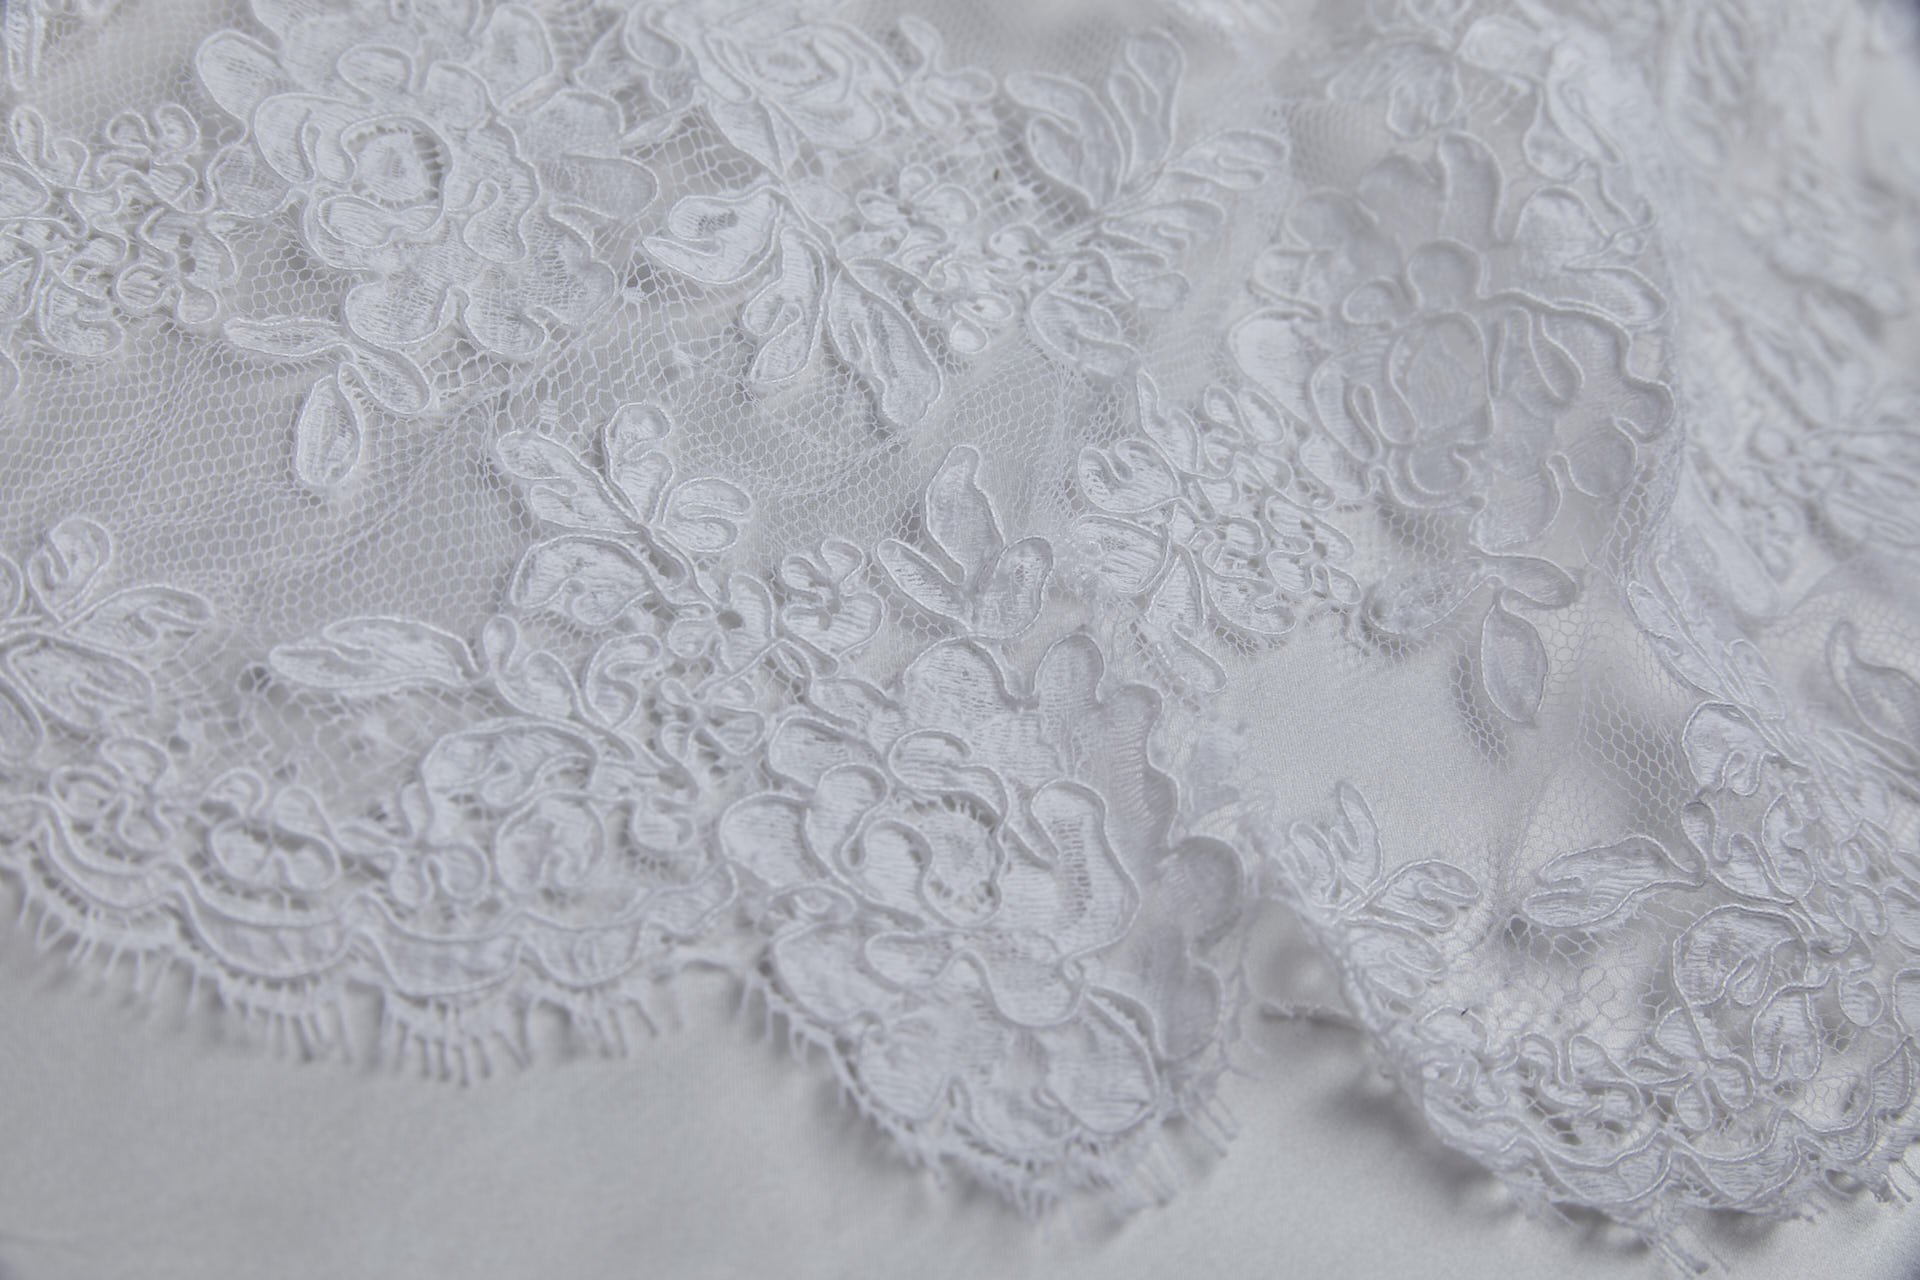 Corded Lace for the bride